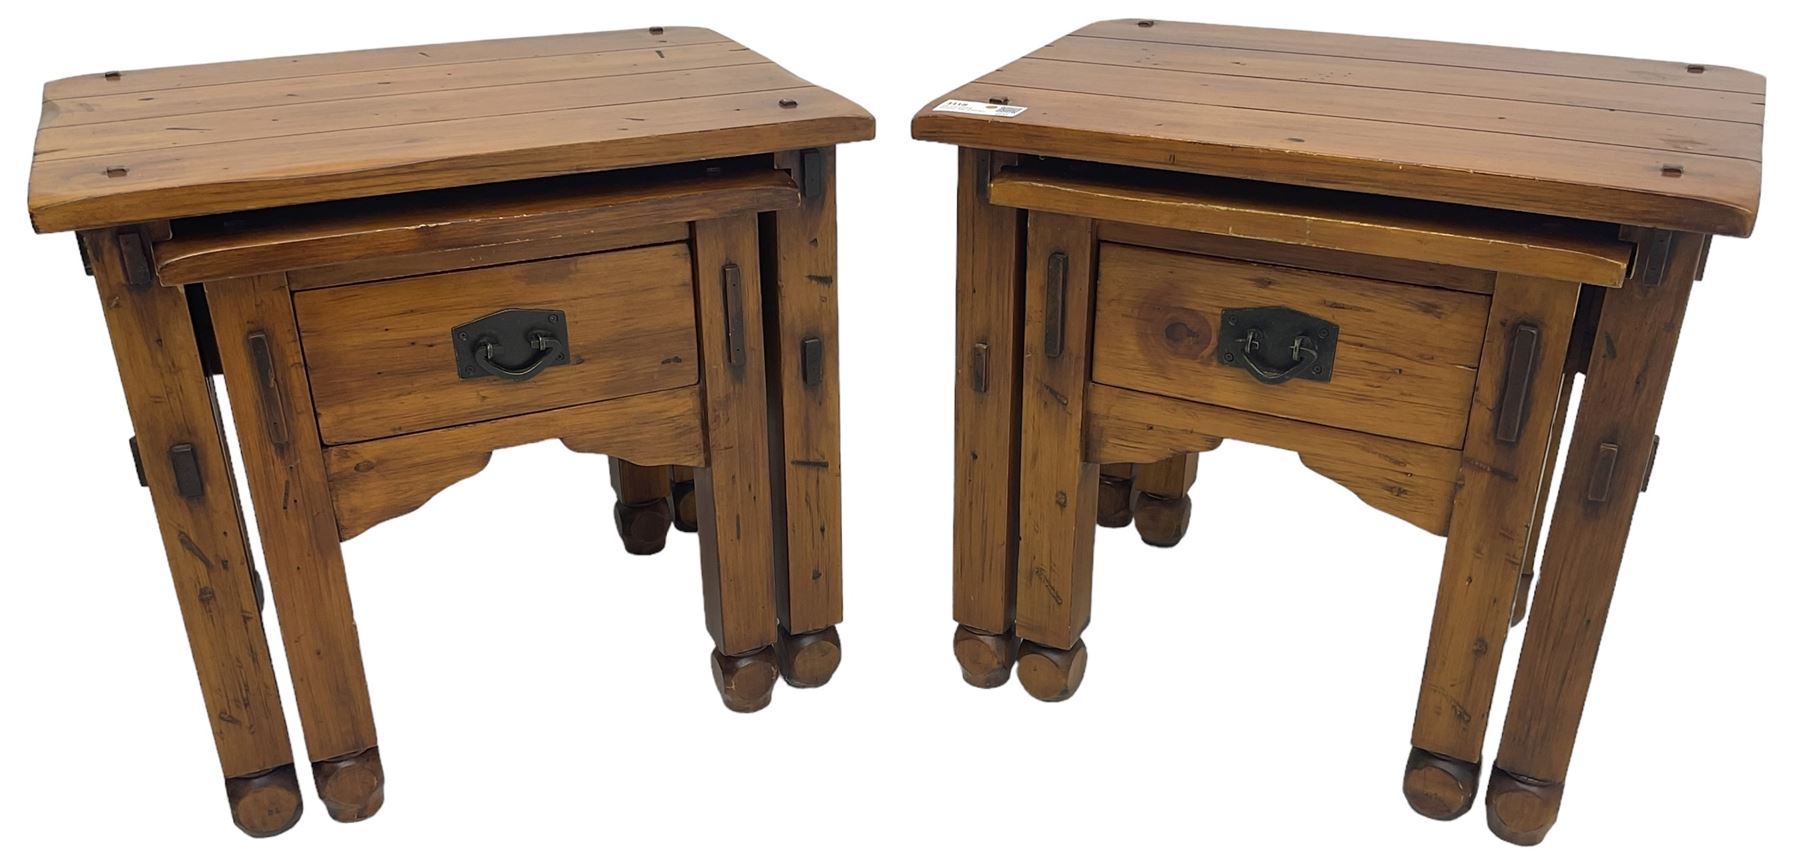 Pair of hardwood nesting lamp tables - Image 2 of 7